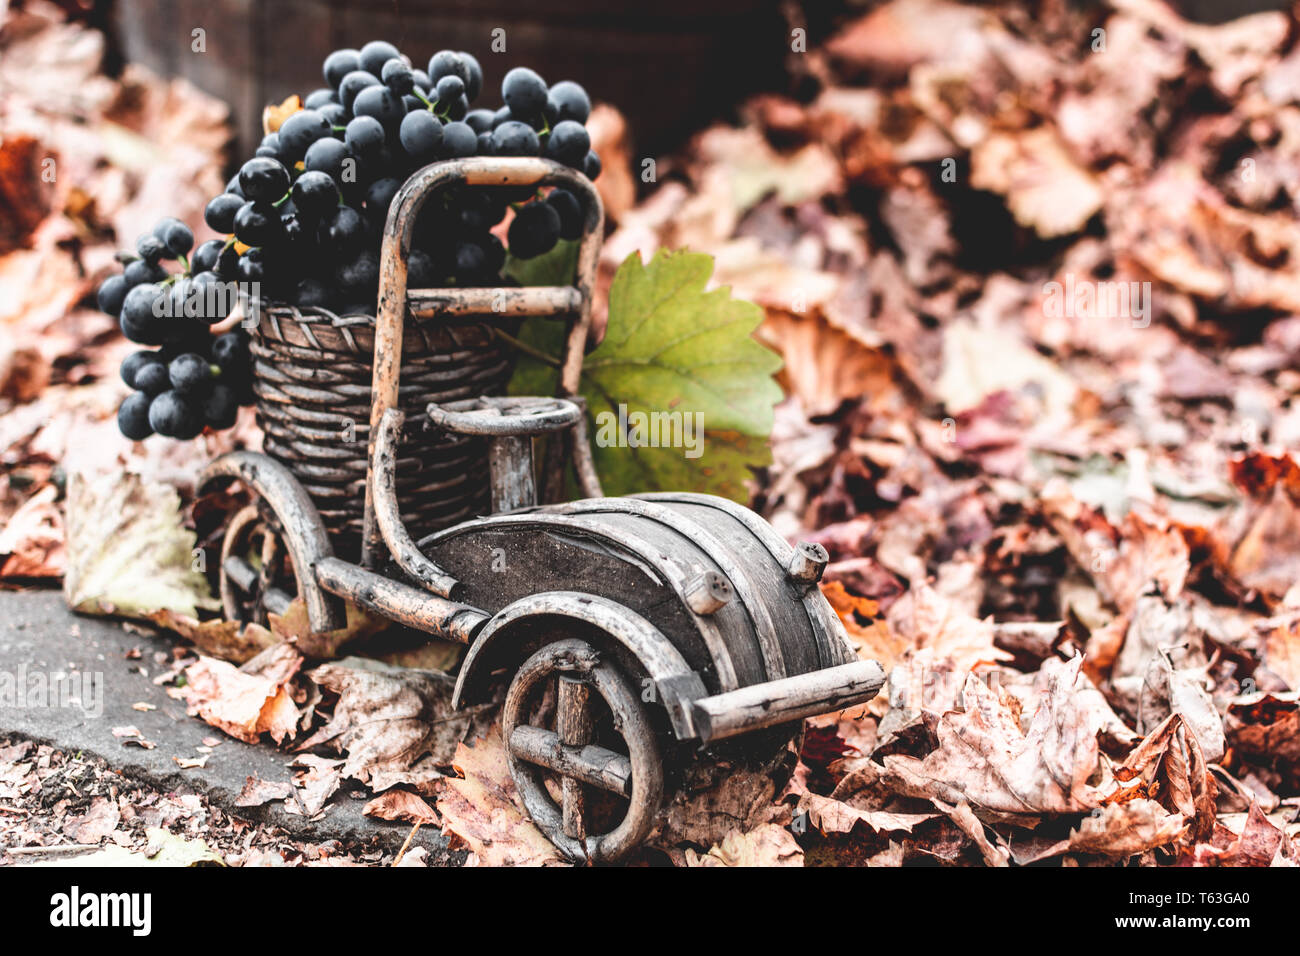 Autumn still life grapes in a wooden car on a background of autumn leaves Stock Photo